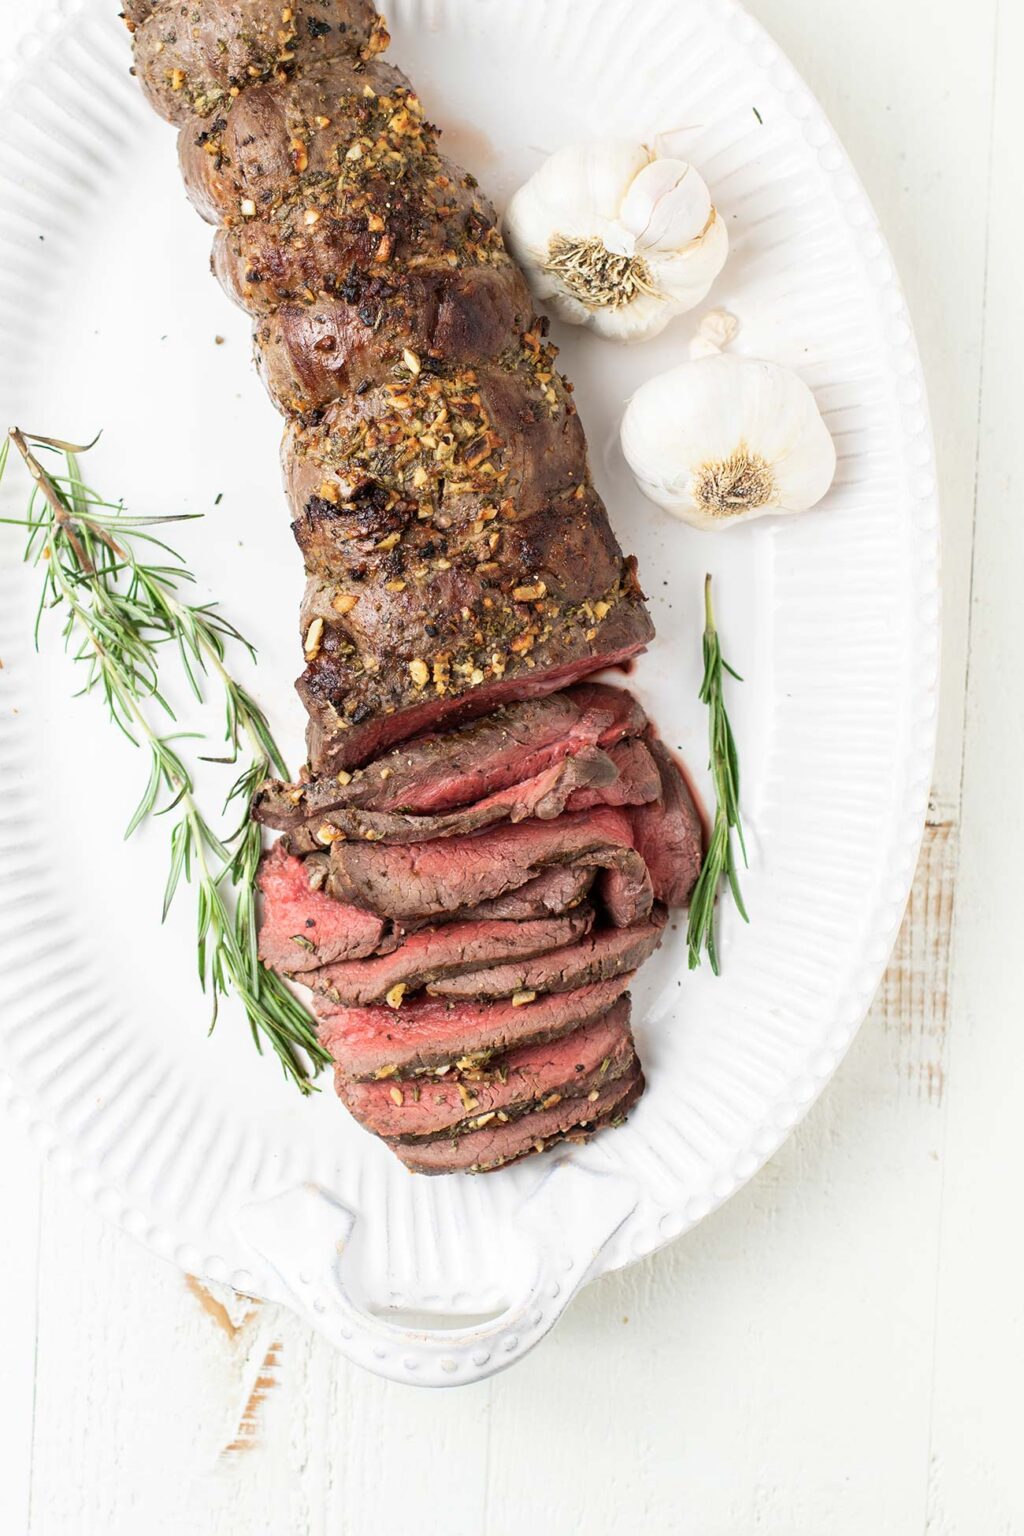 Best Beef Tenderloin Recipe with Garlic and Herbs - Chateaubriand